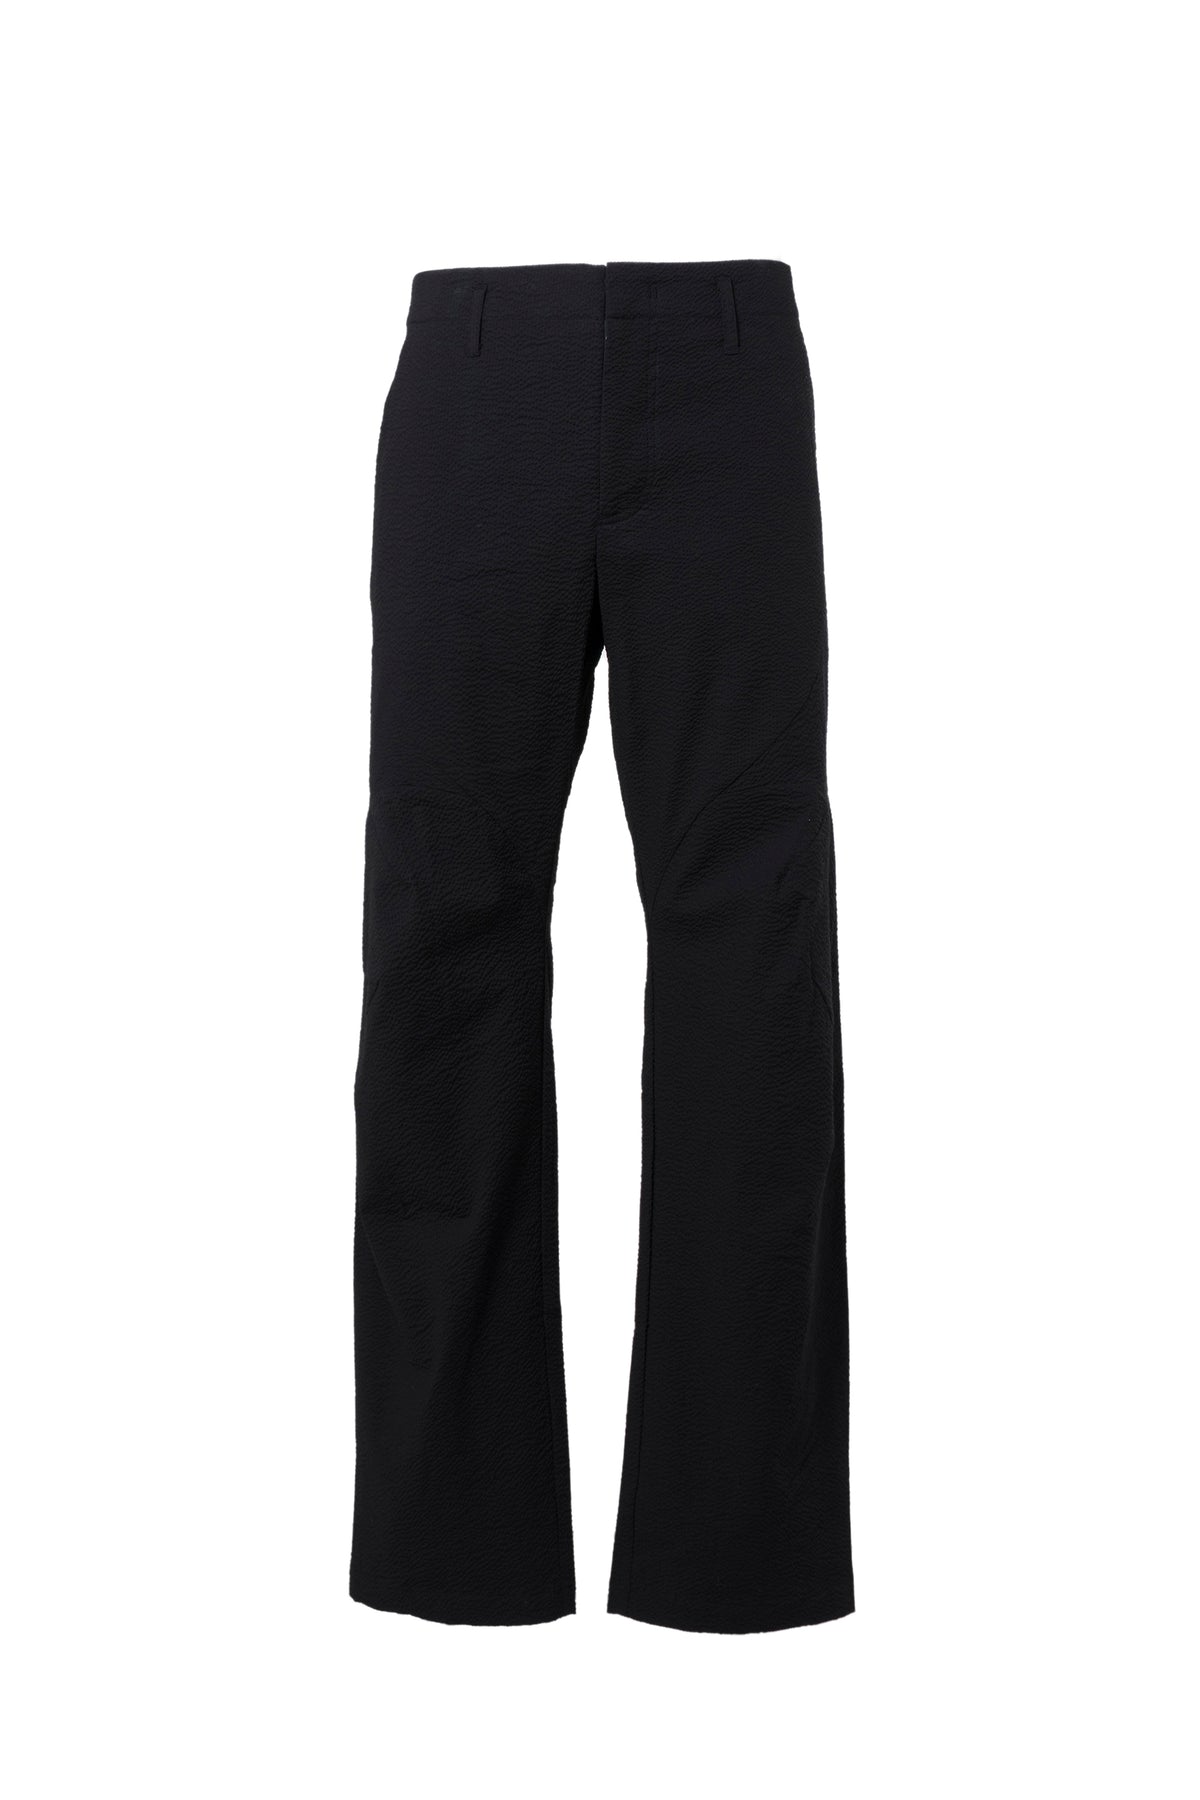 5.0+ TROUSERS RIGHT / BLK